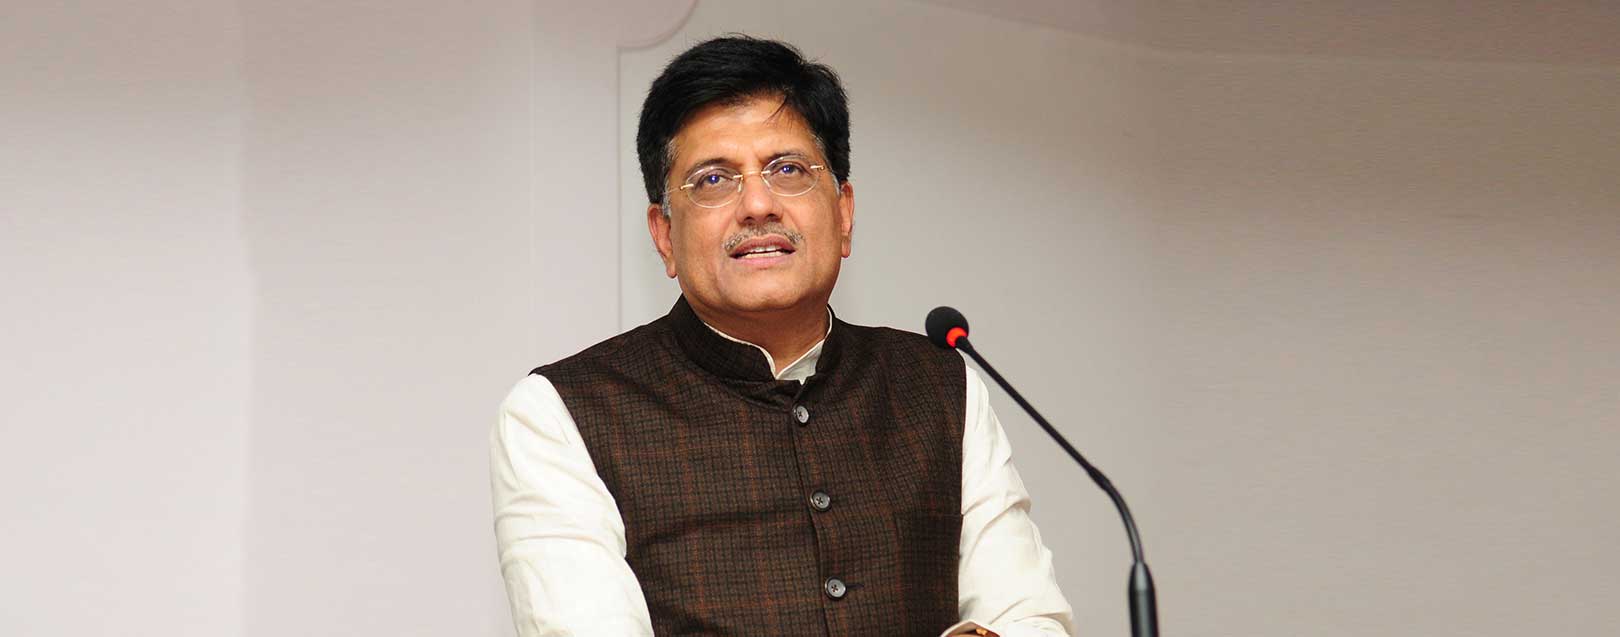 Govt working with banks to ramp up PoS machines: Goyal